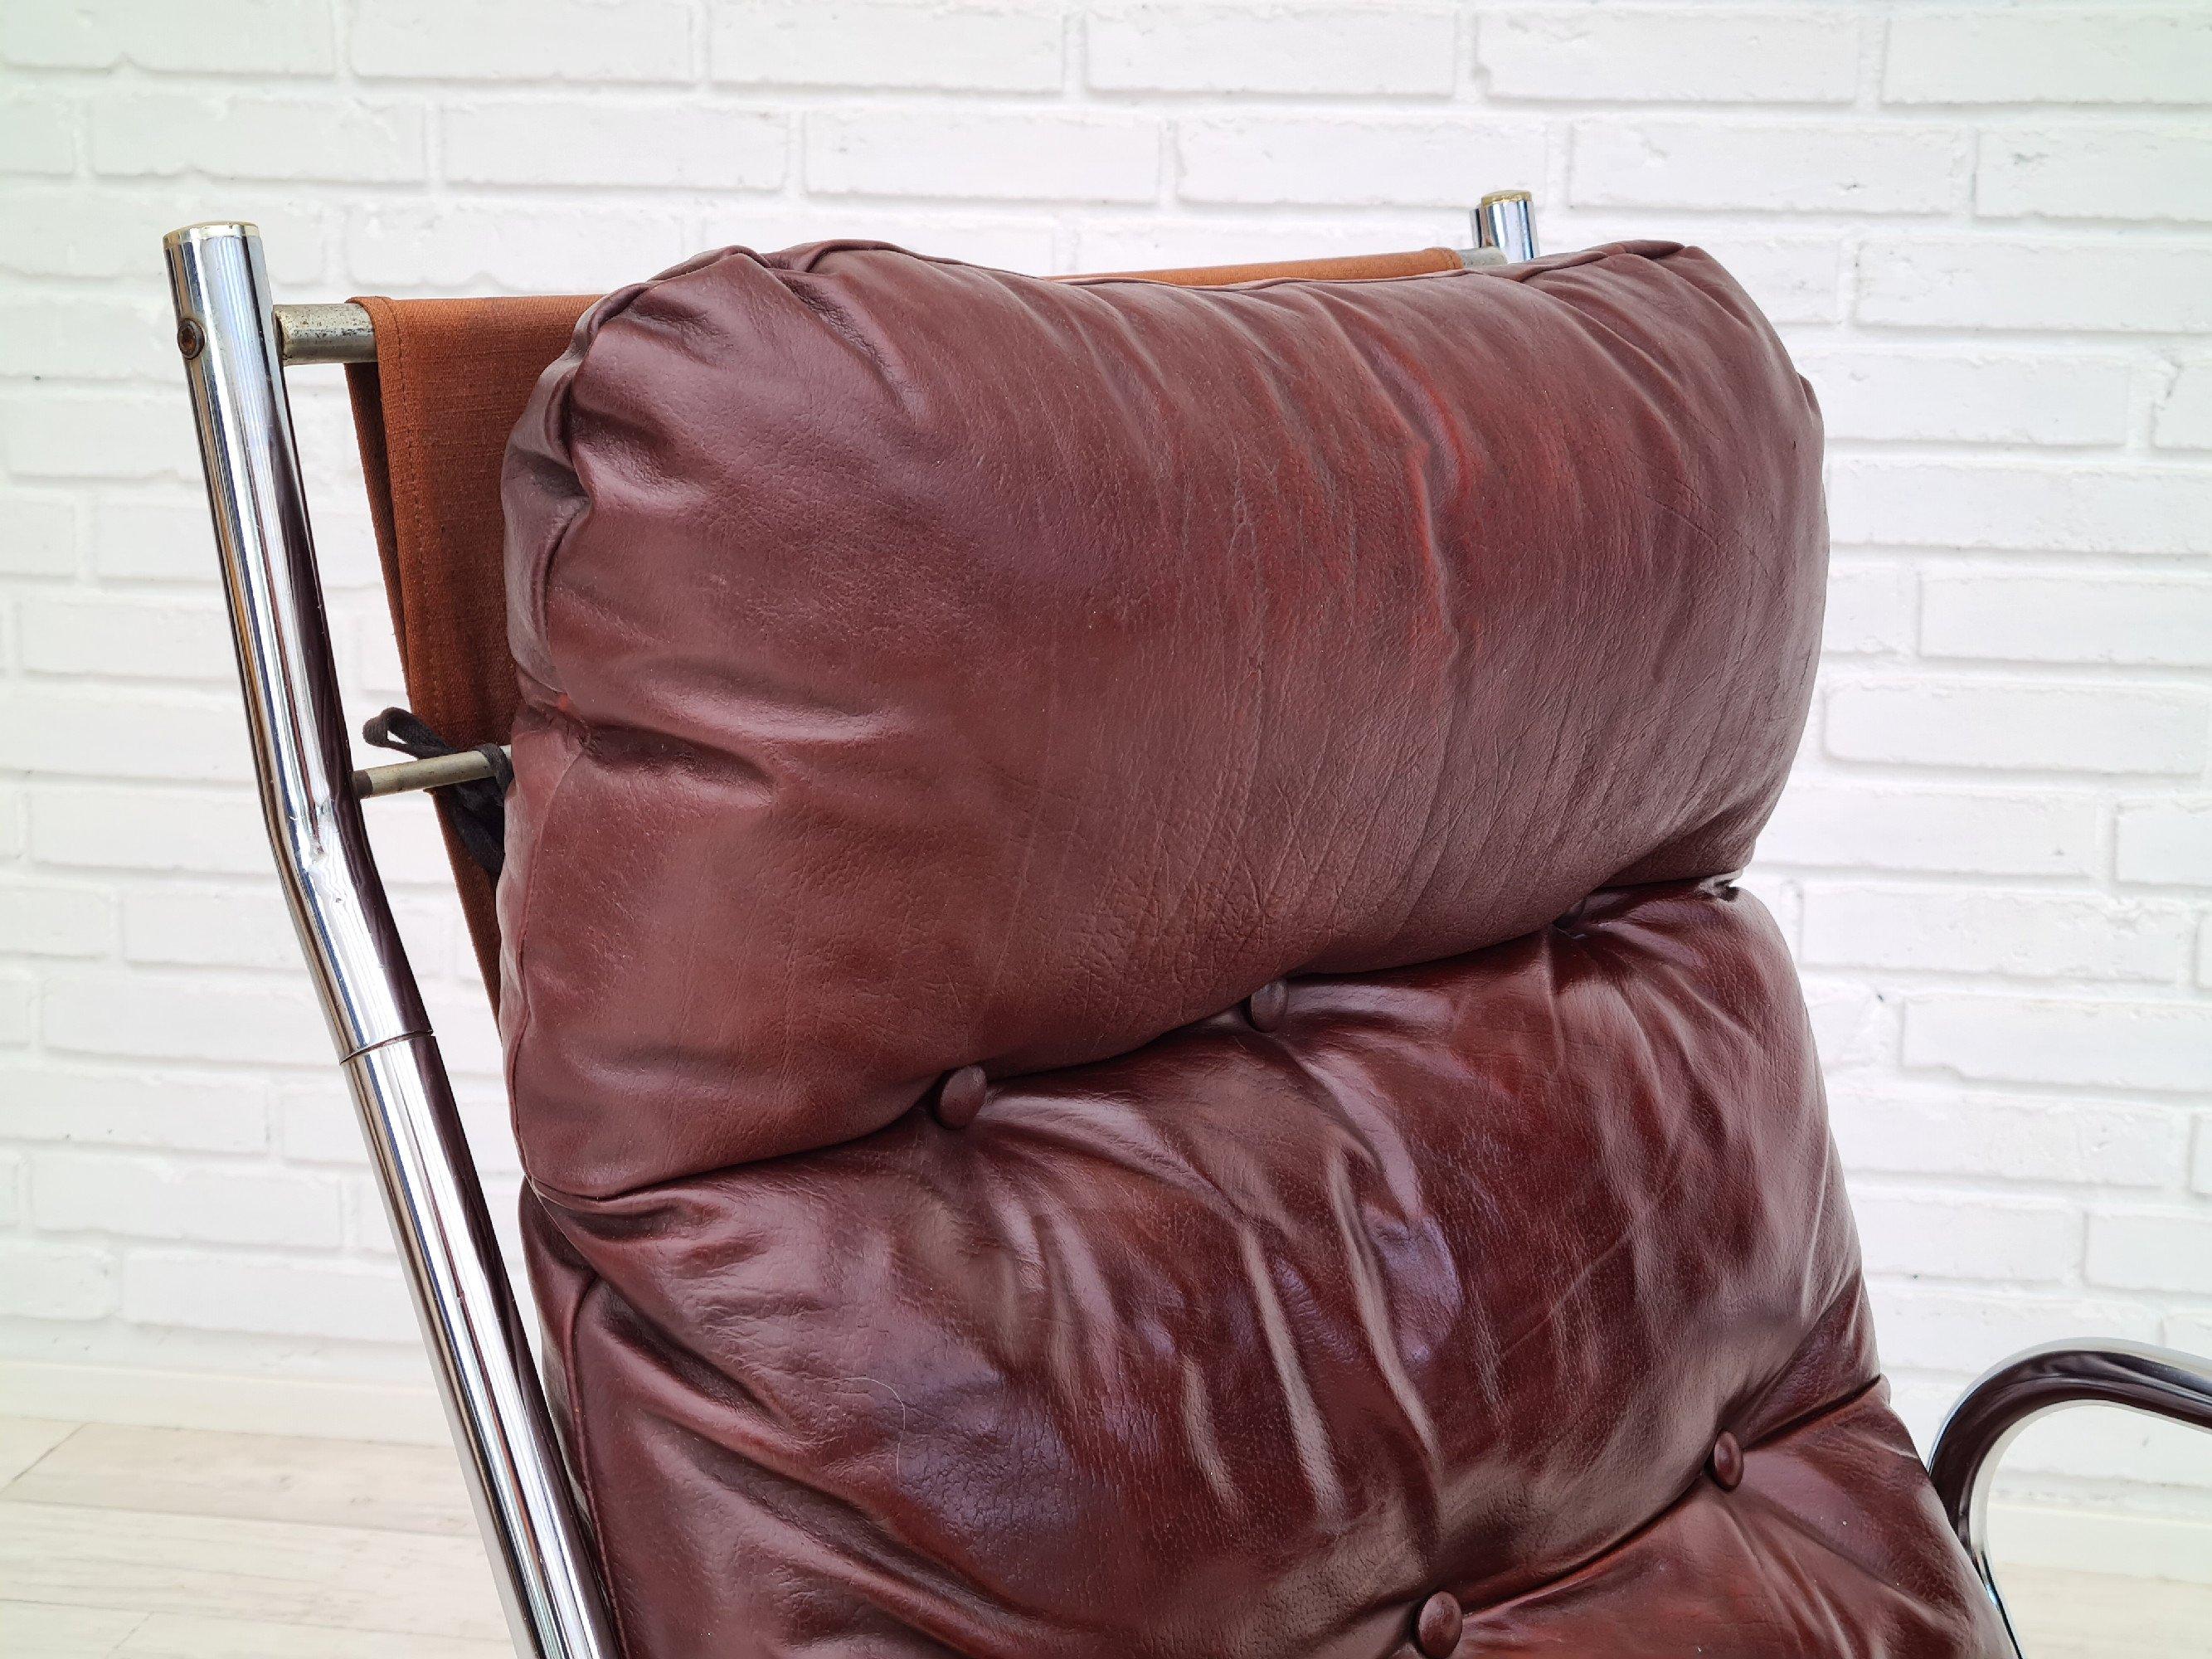 70s, Danish design, lounge chair, leather, original condition. Original brown leather in good condition with nice patina. Canvas tied. Armrest of brown leather, tubes, chrome steel. Removable pillows. No smells, do not smoke. The chair was